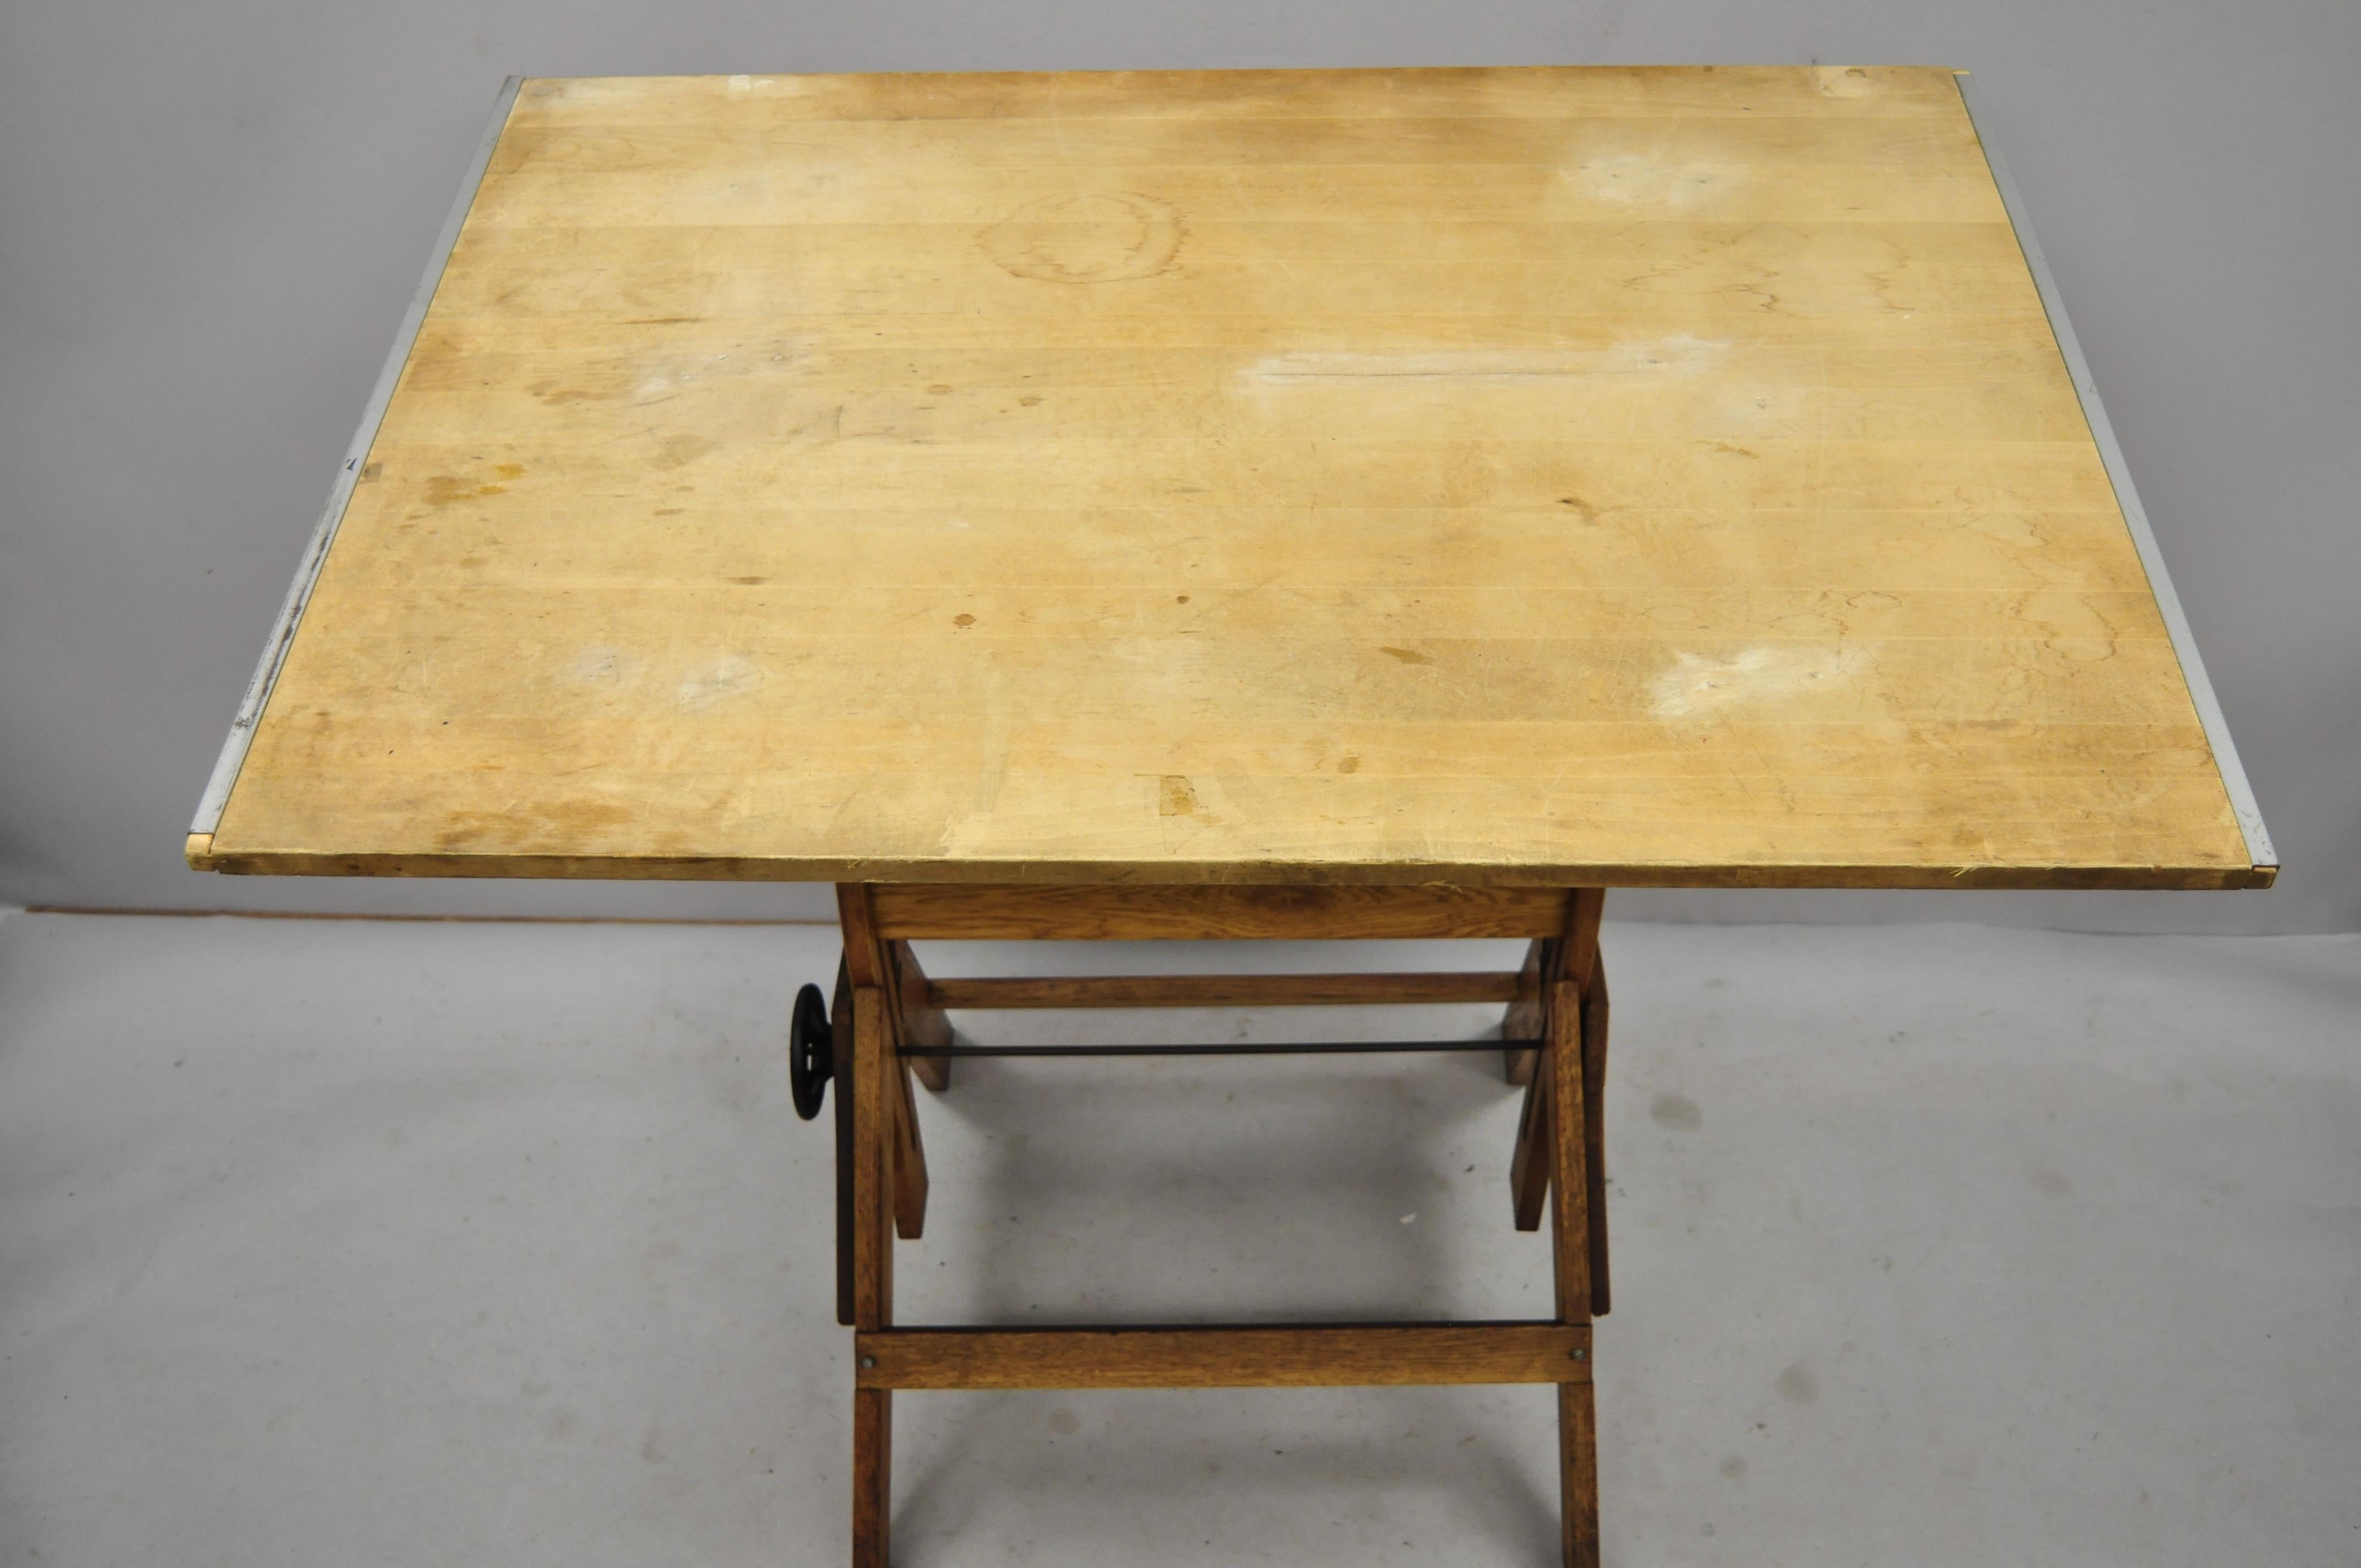 North American Antique Oak Wood and Cast Iron Adjustable Drafting Work Table Desk